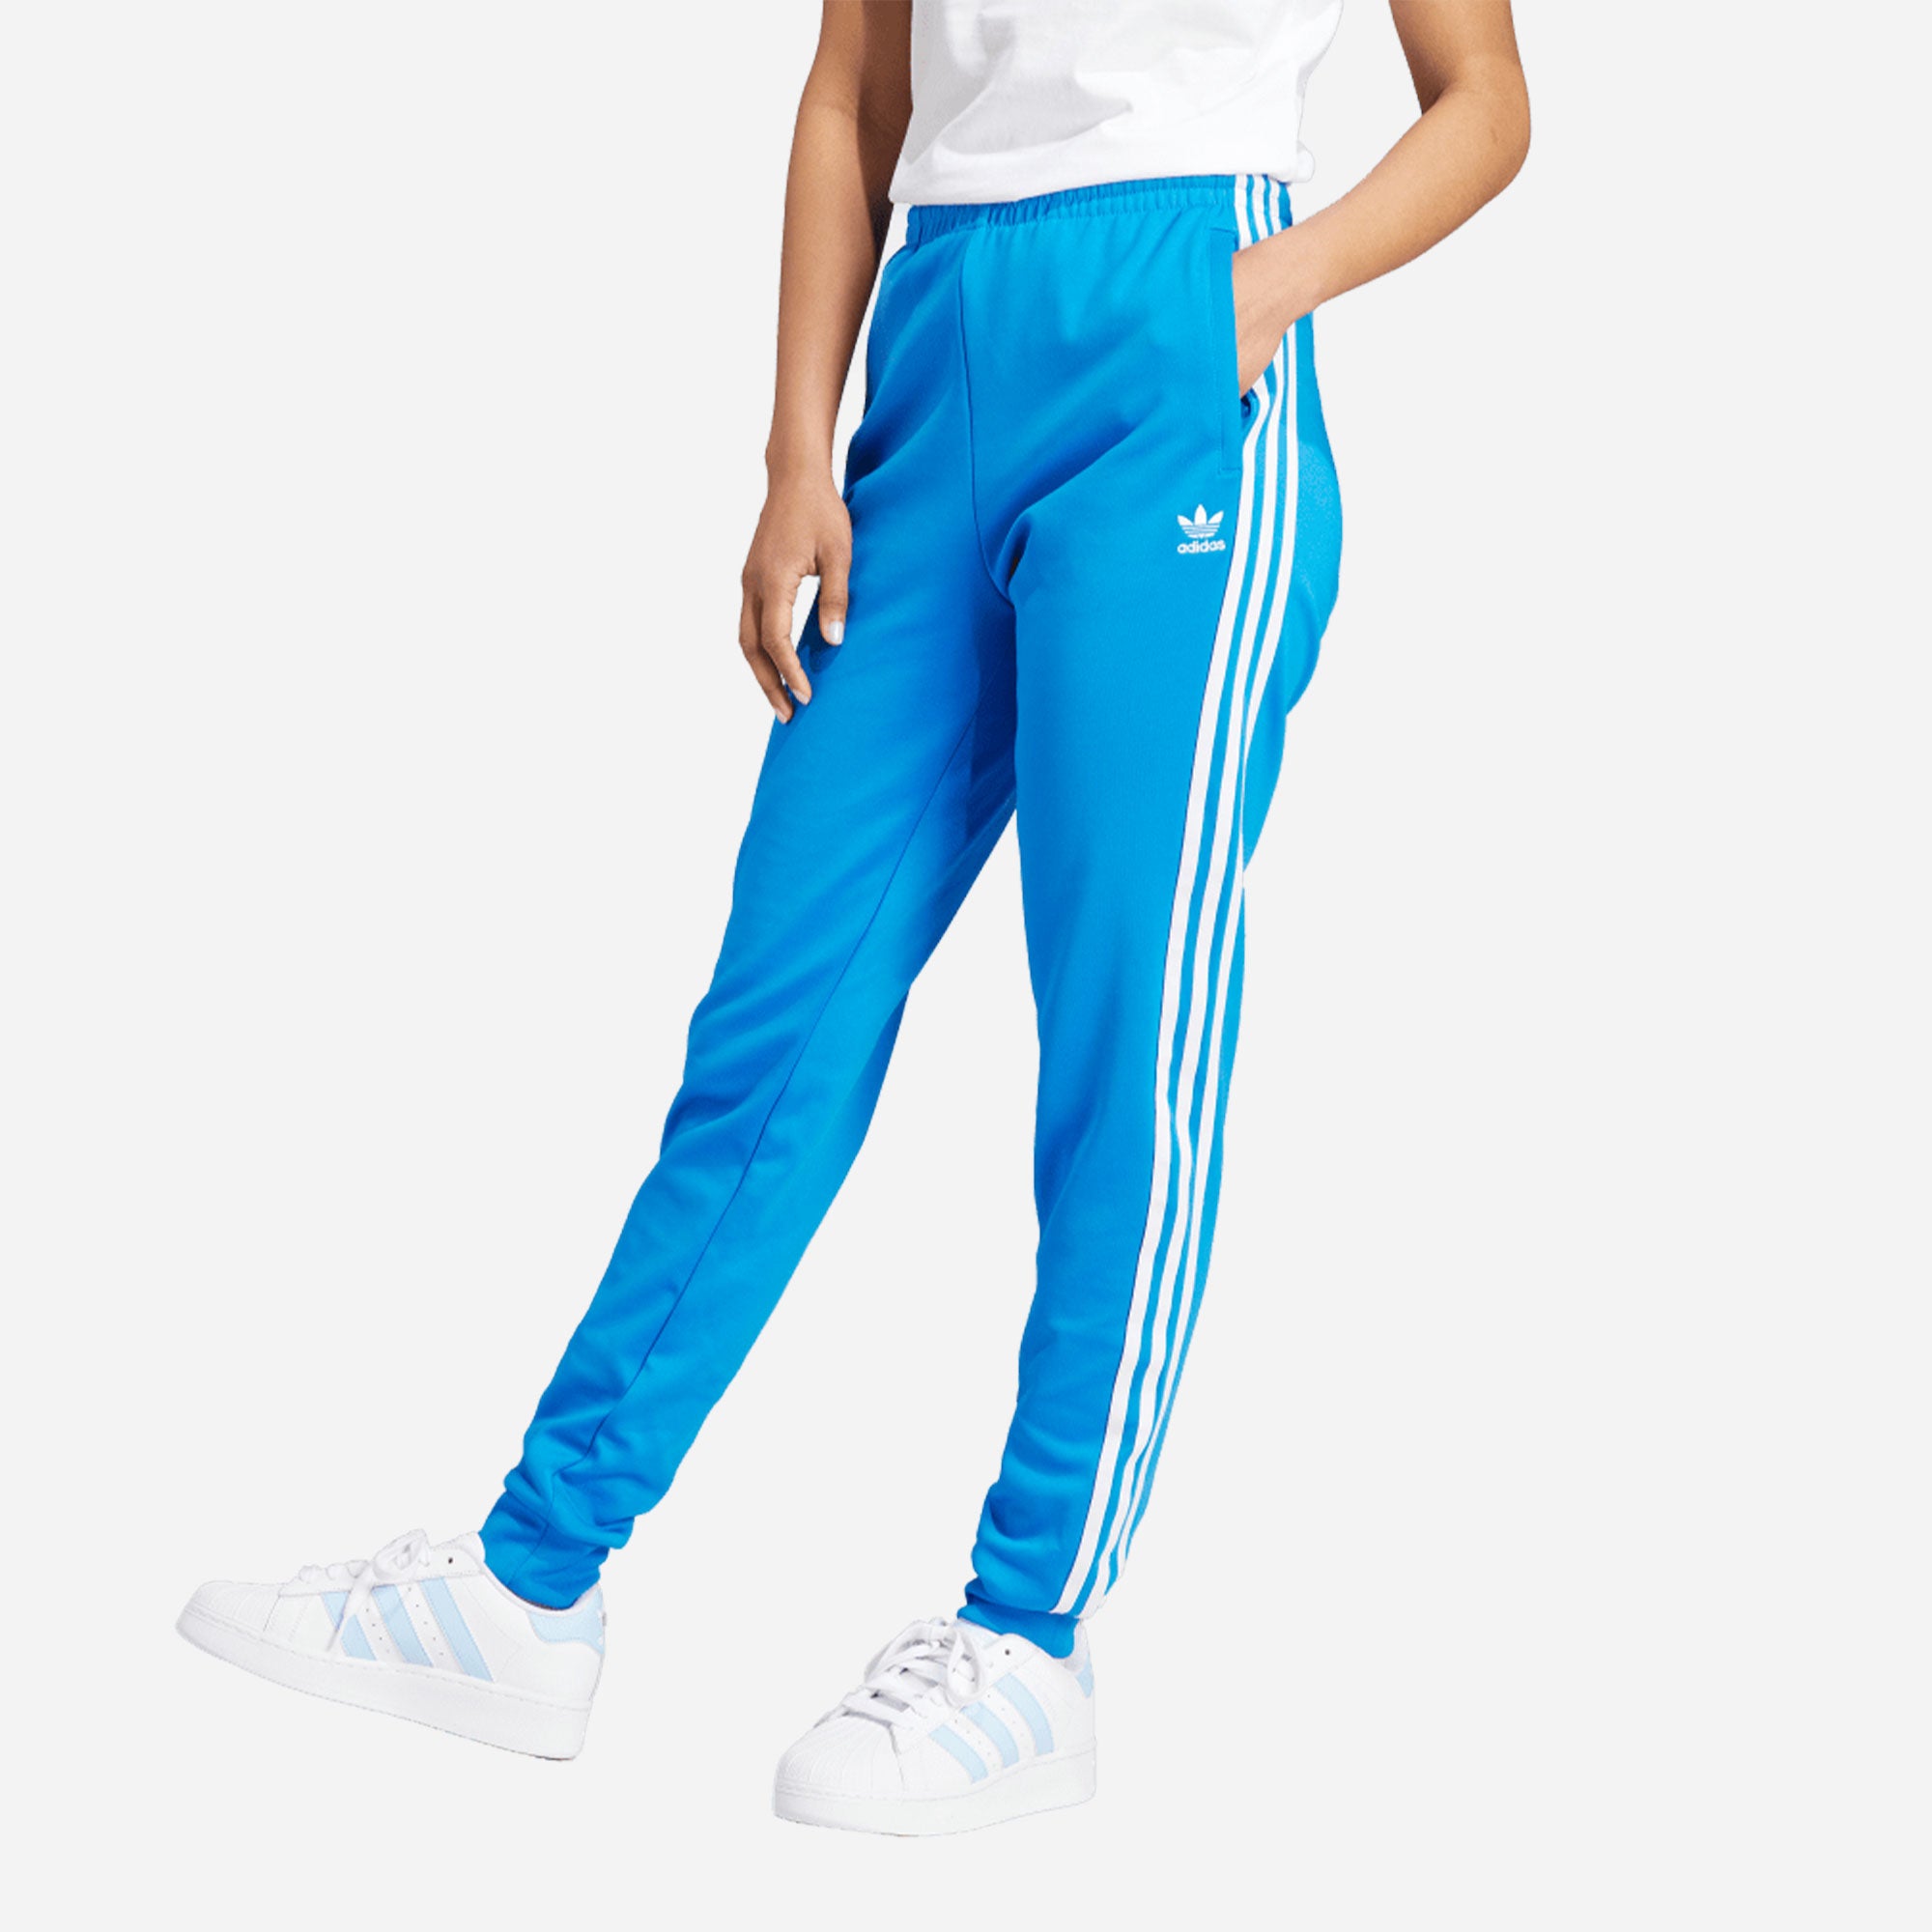 How To Style Track Pants - Womens Outfit Ideas